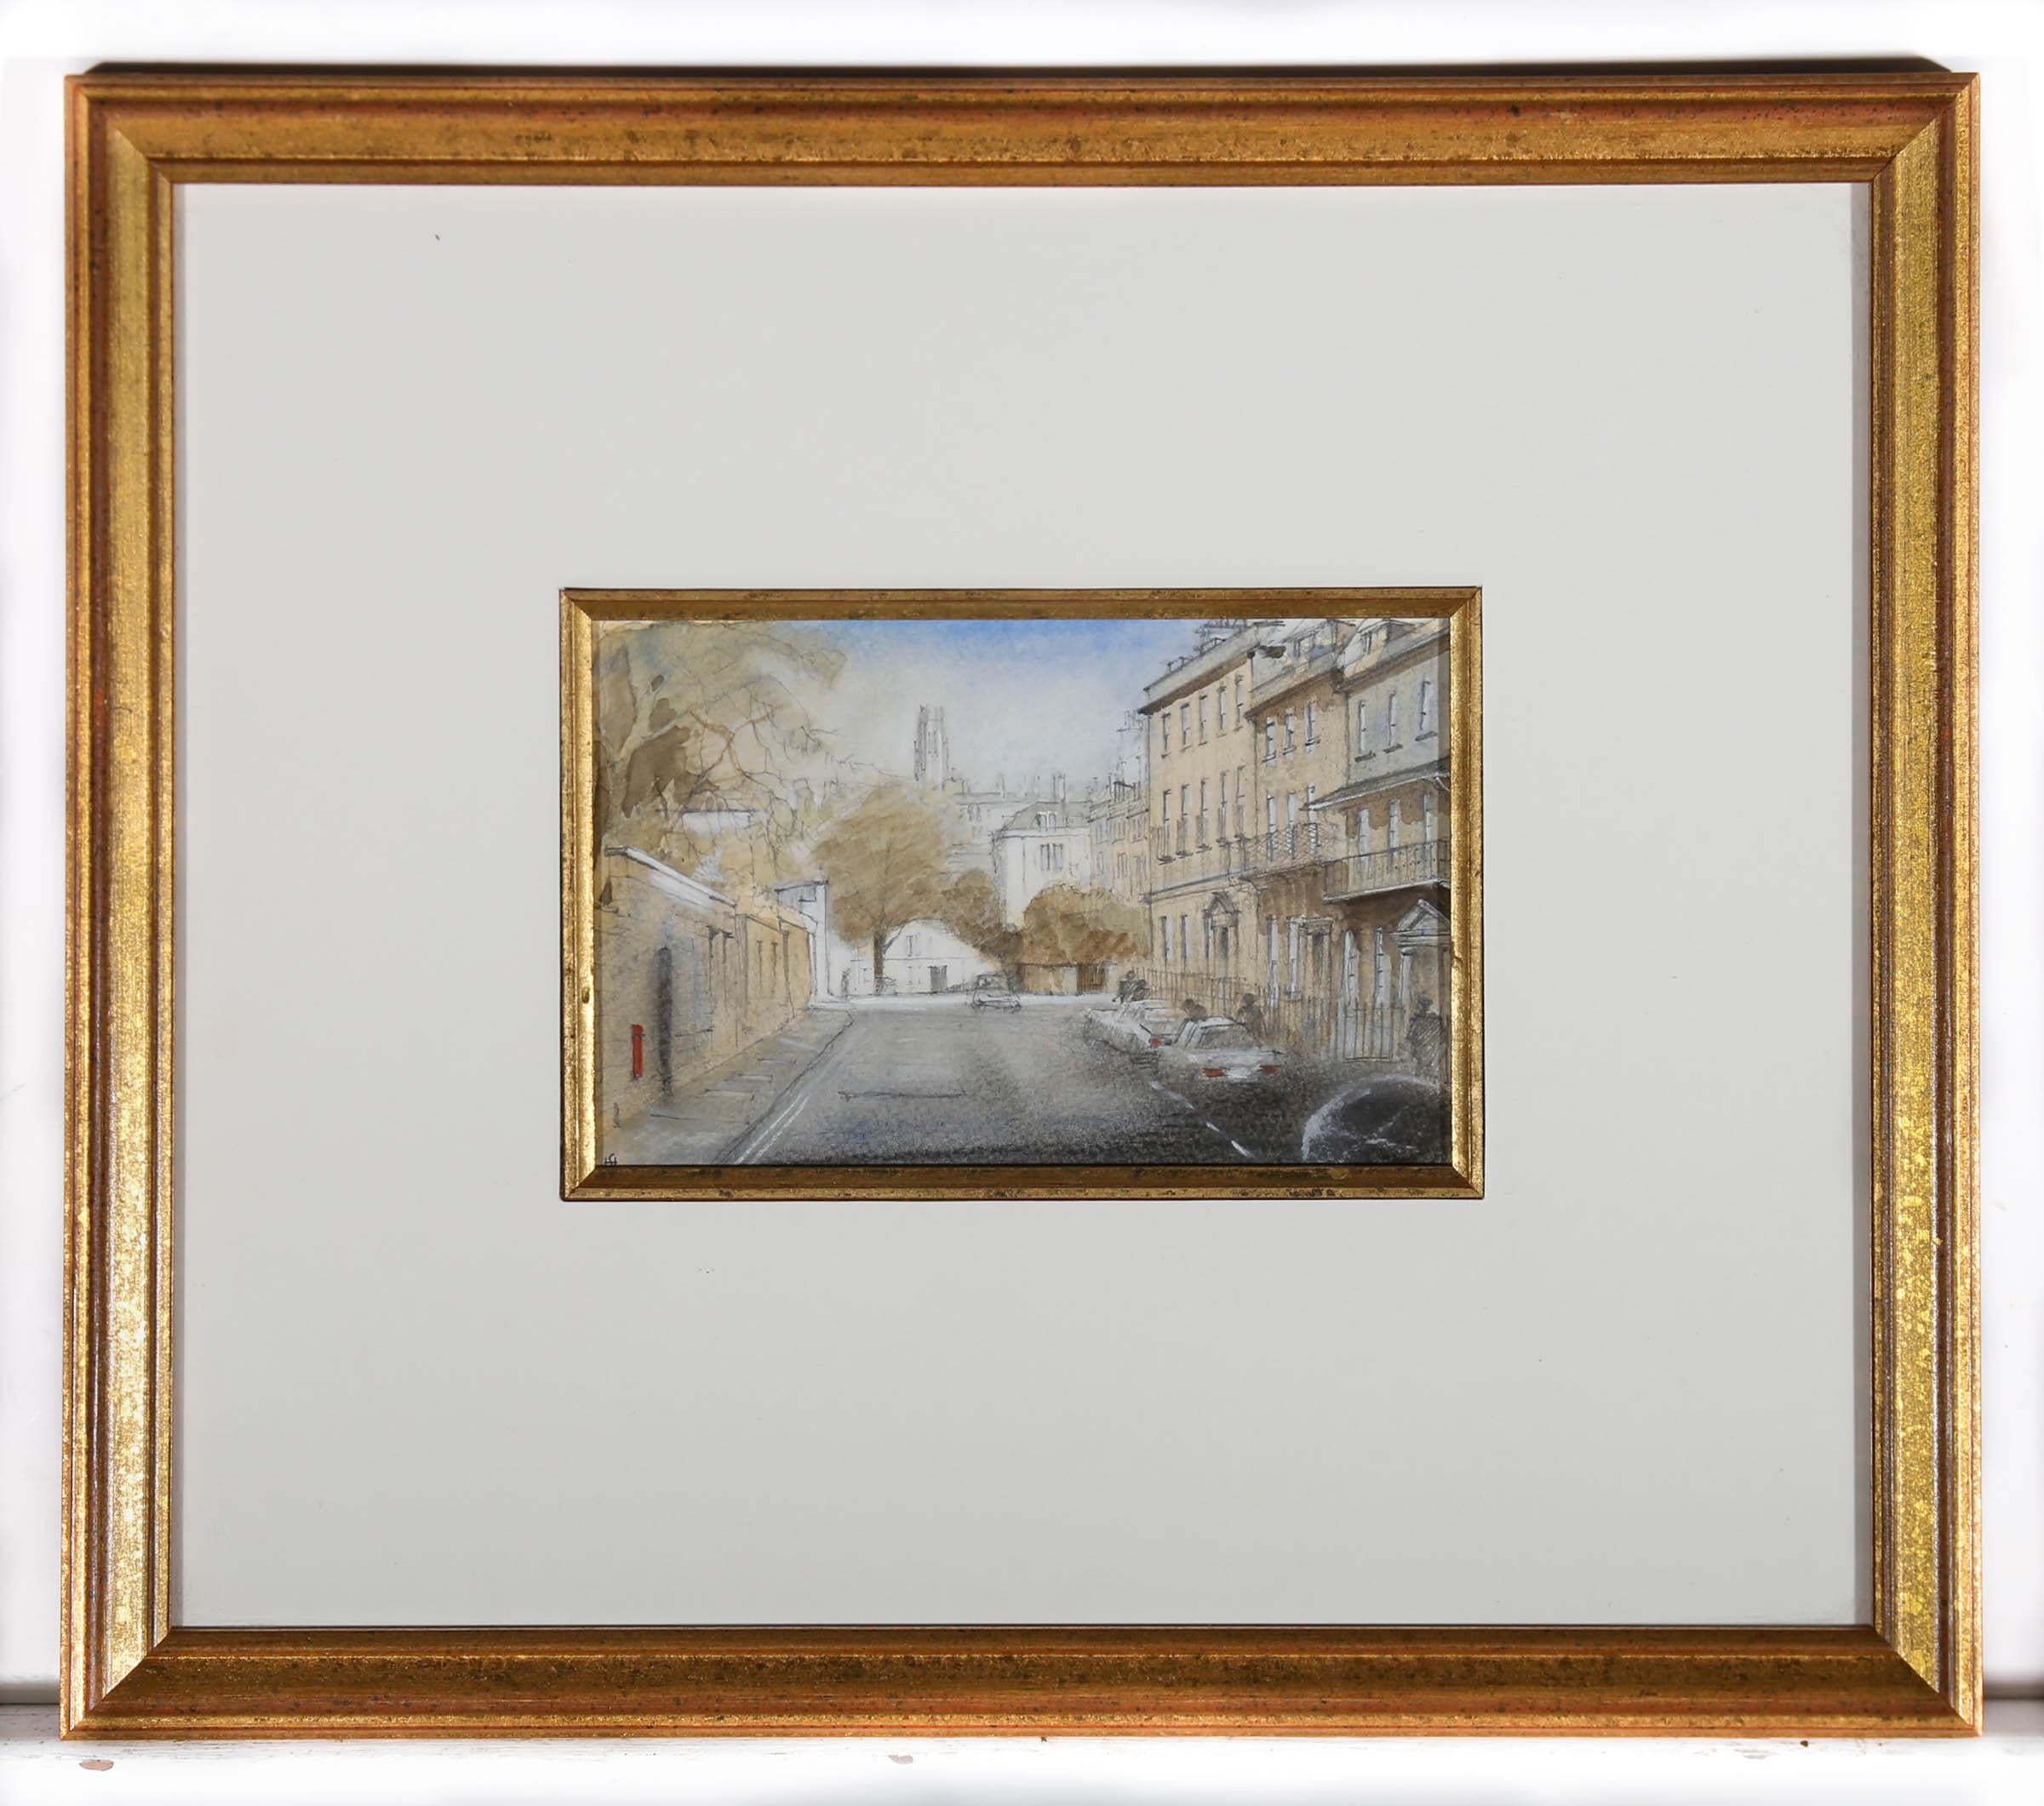 This delightful watercolour by South West artist Simon Hodges depicts a view down Upper Church Street, with the tower of St. Stephens visible above the Georgian architecture of Bath. Signed with monogram to the lower left. The painting has been